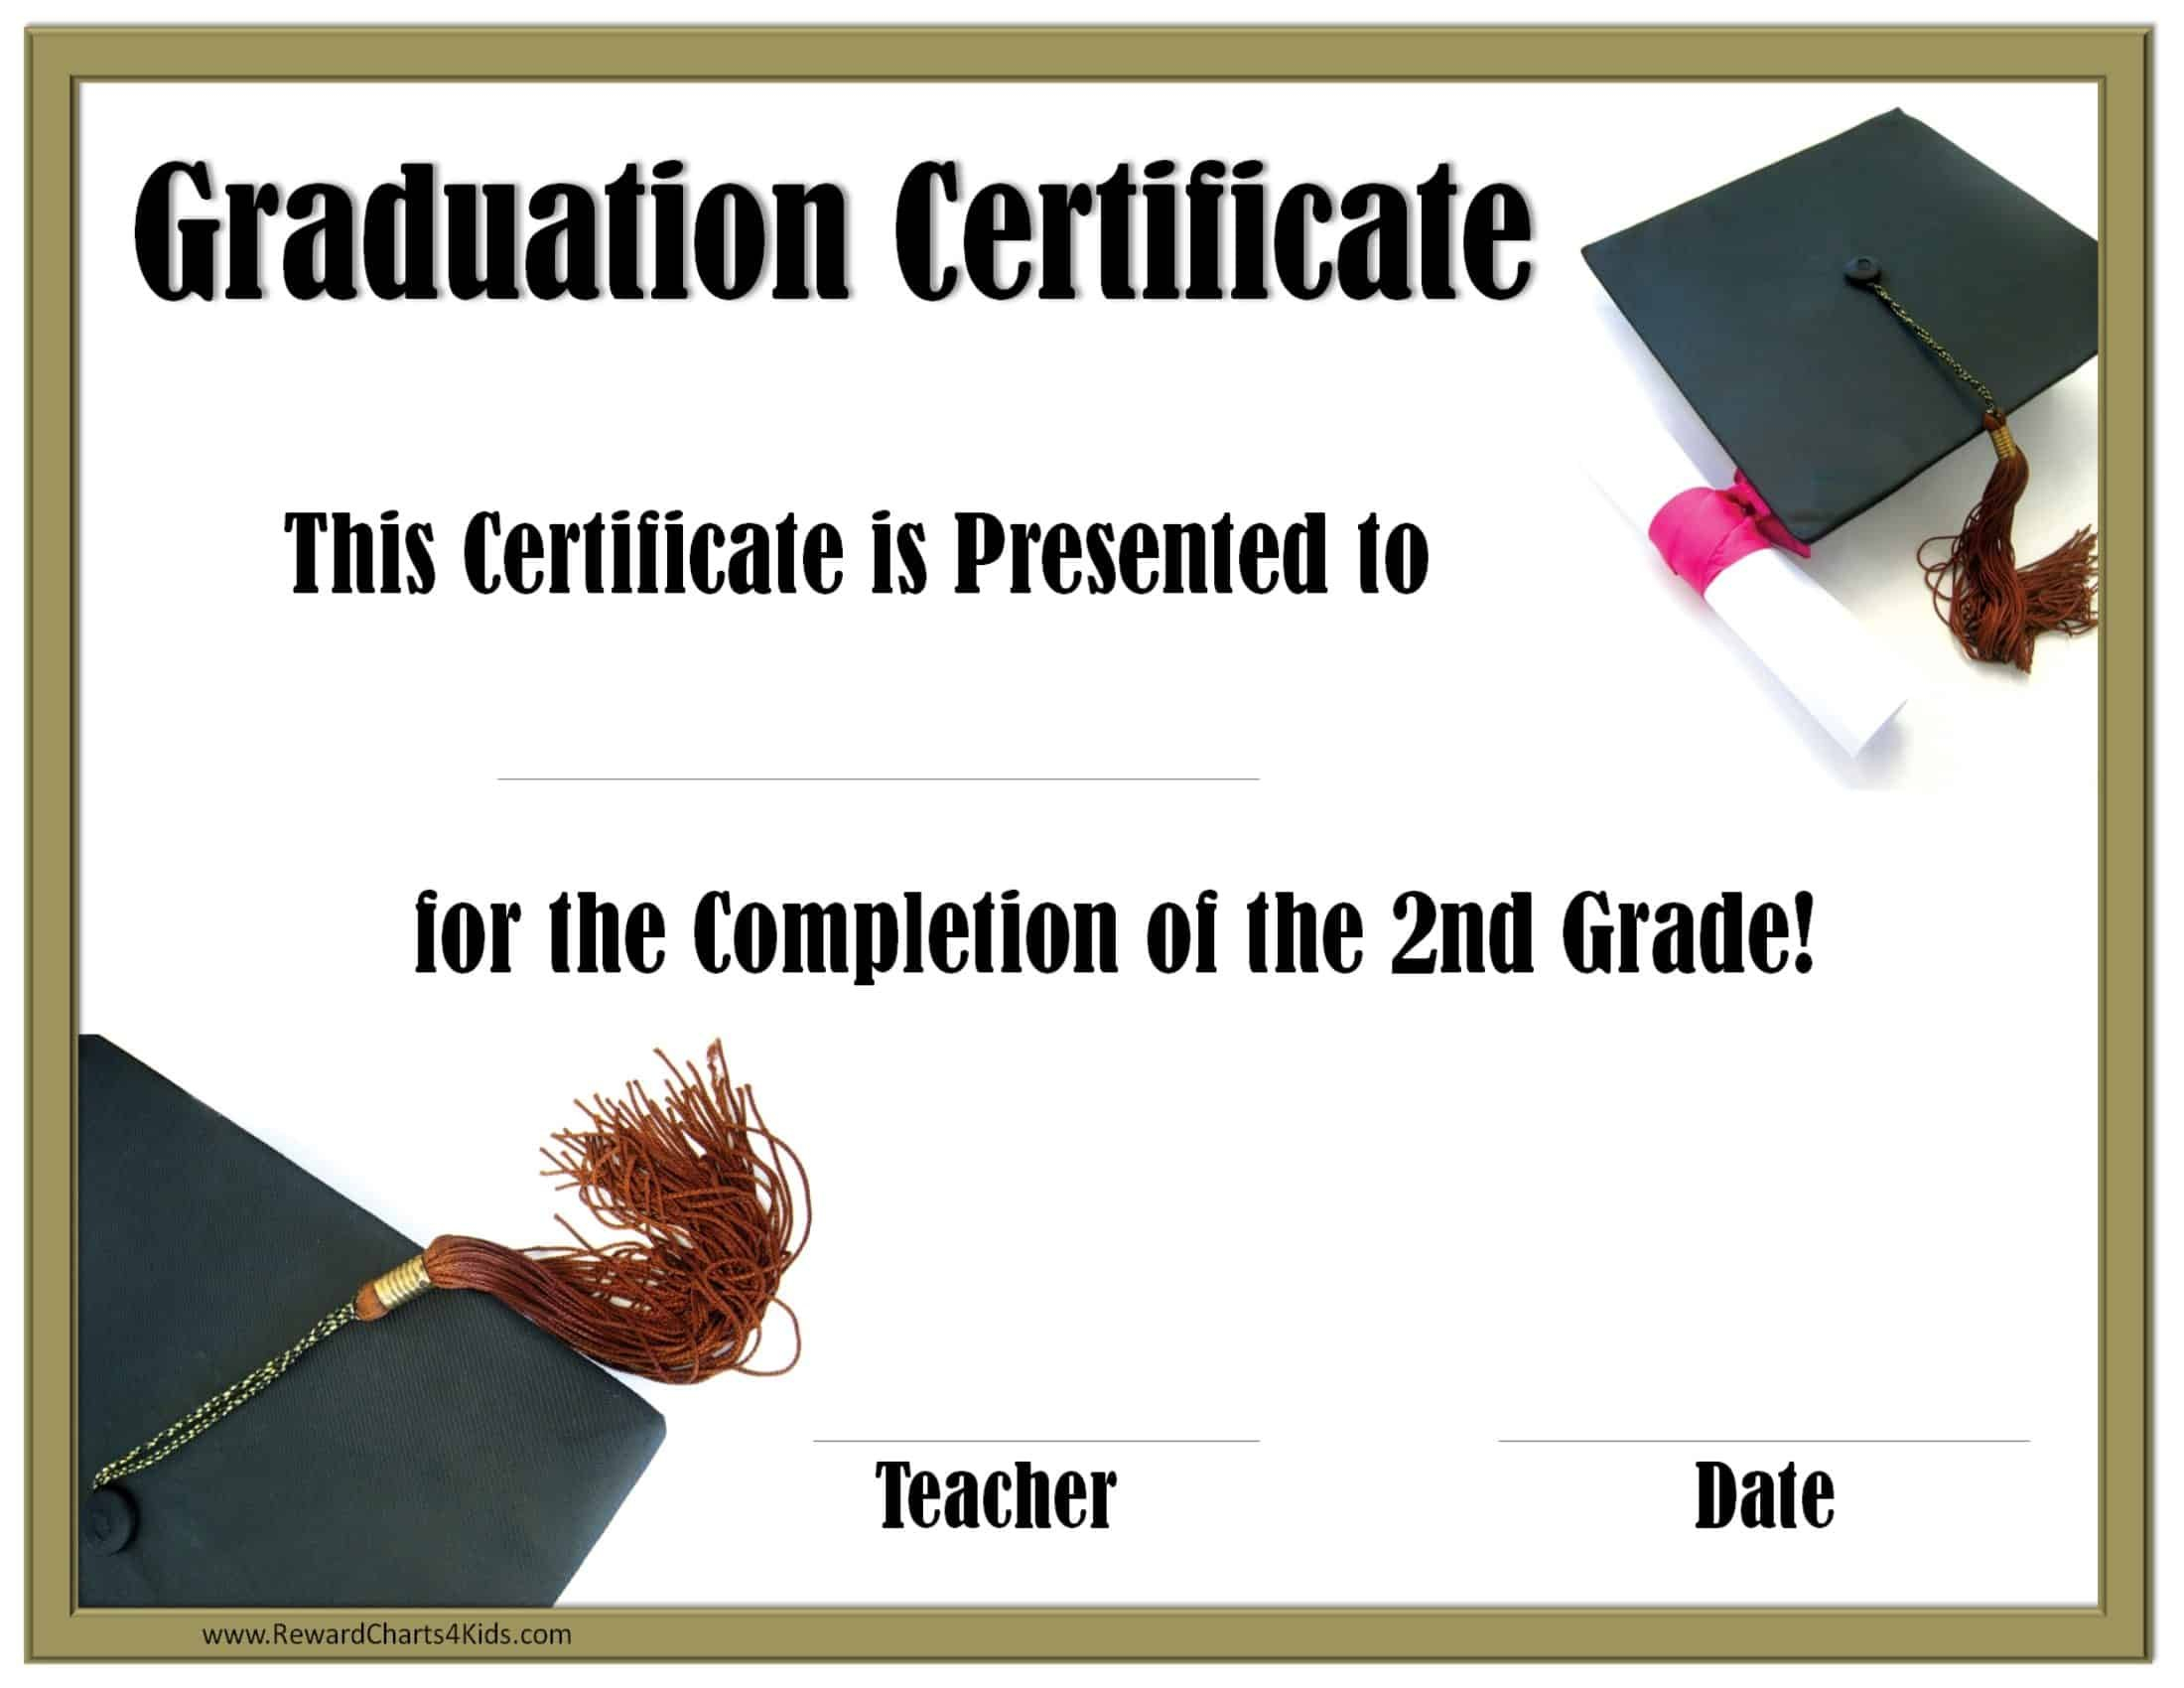 School Graduation Certificates  Customize Online With Or Without A within 5Th Grade Graduation Certificate Template